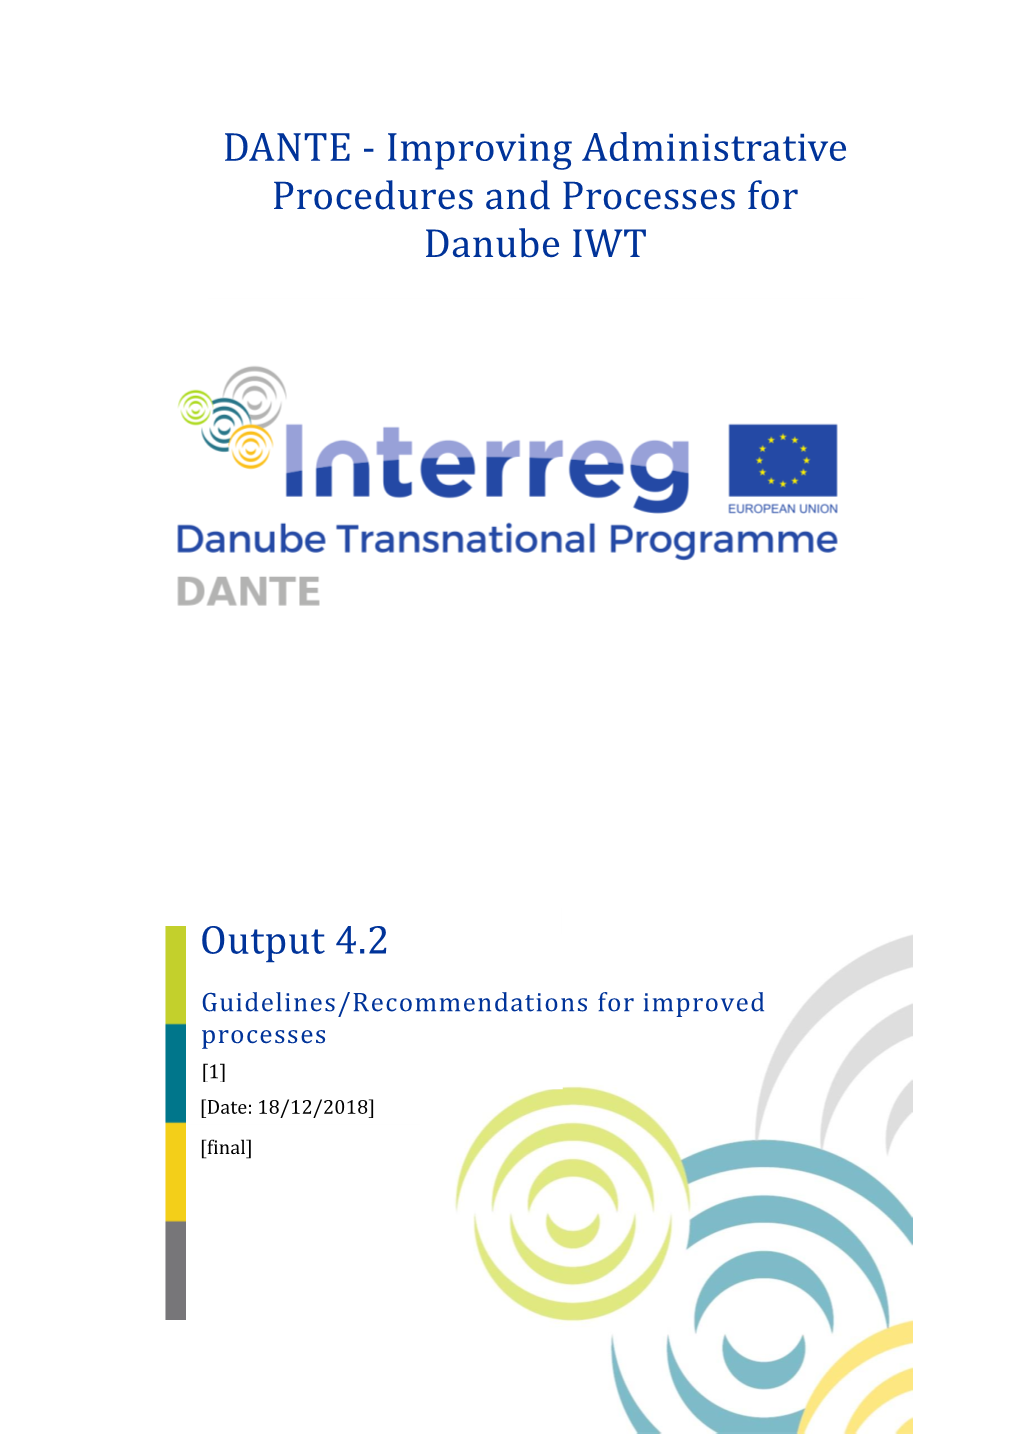 DANTE - Improving Administrative Procedures and Processes For